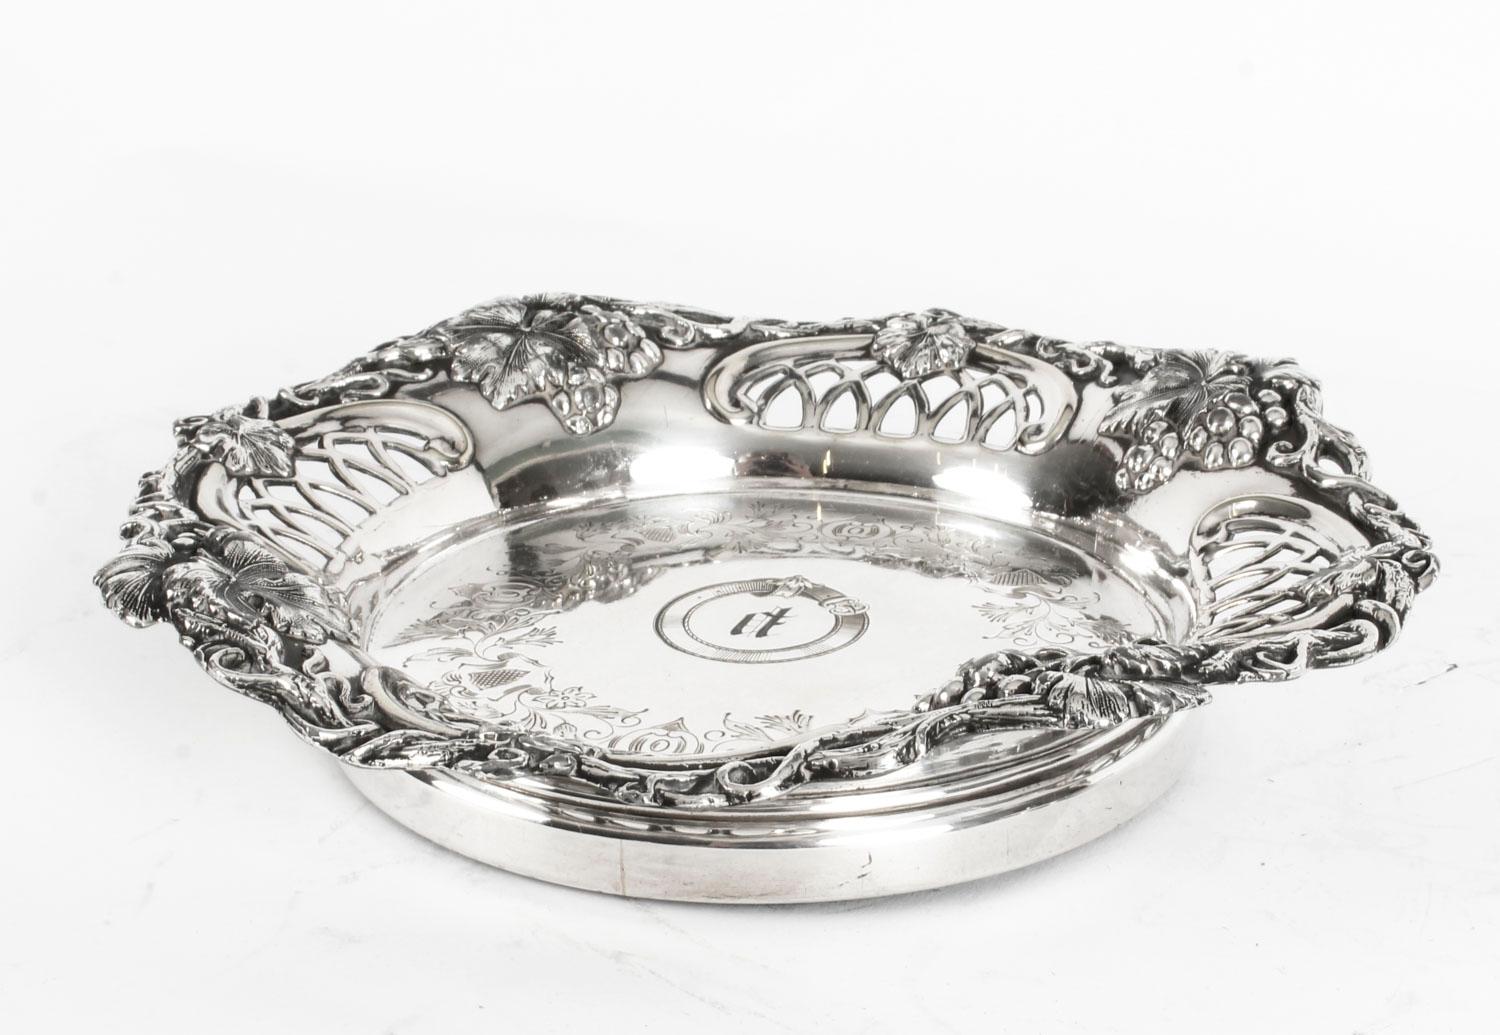 This is a very attractive English George IV pair of antique Old Sheffield silver on copper wine bottle coasters, circa 1820 in date.

The shaped circular wine coasters feature exquisite vine and grape borders with pierced decoration, with floral